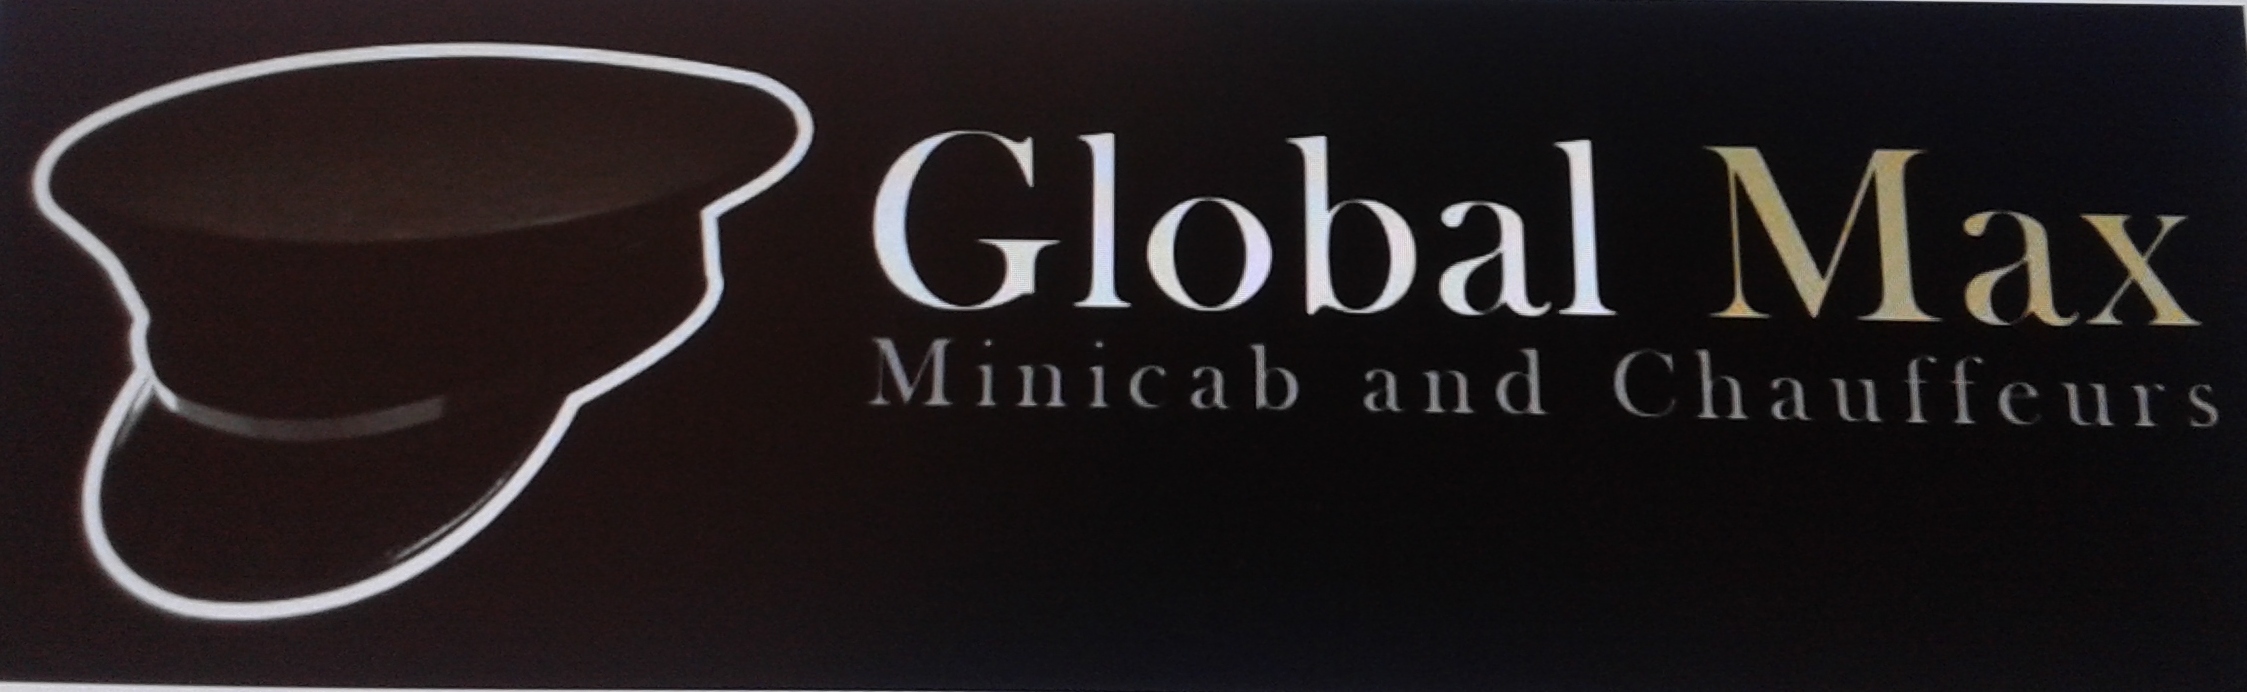 Logo of Global Max Minicab and Chauffeurs